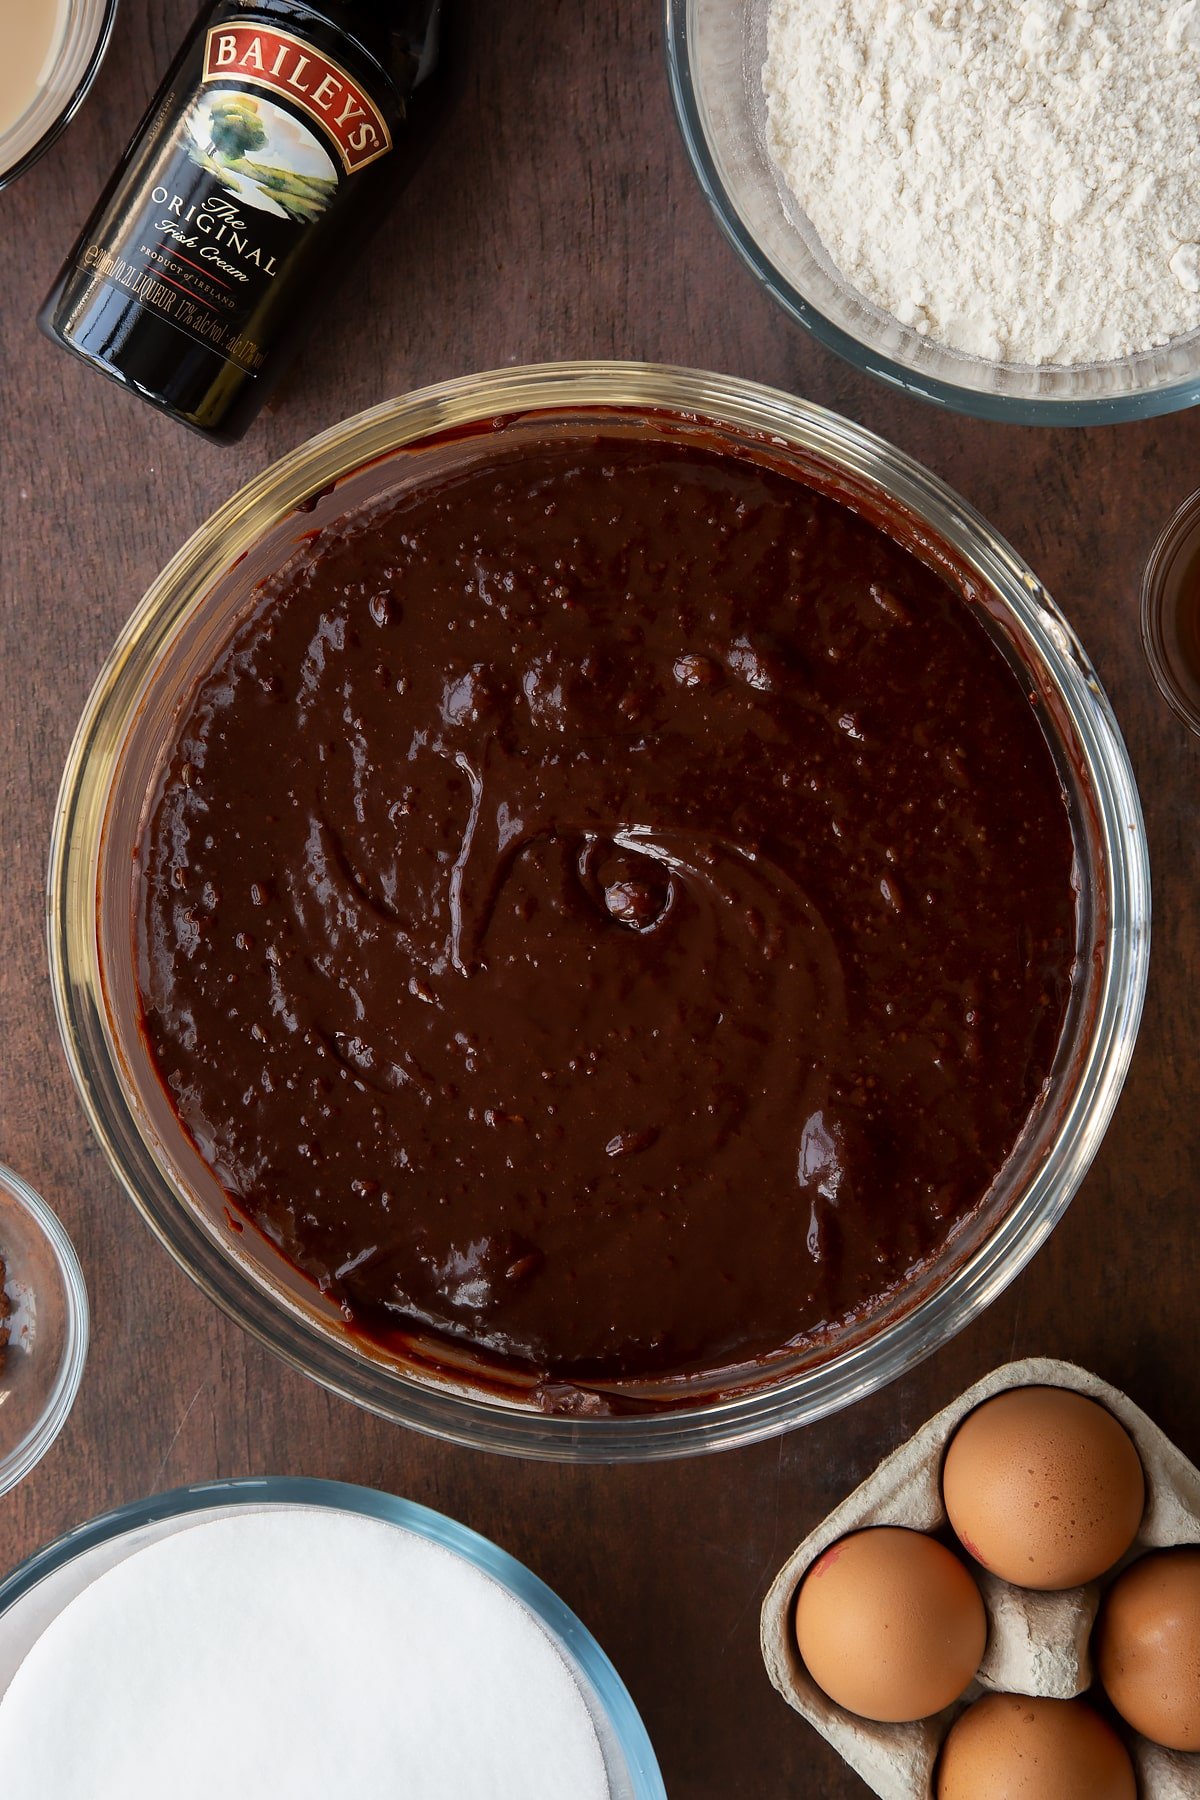 Baileys brownie batter in a glass bowl. Ingredients to make Baileys brownies surround the bowl.